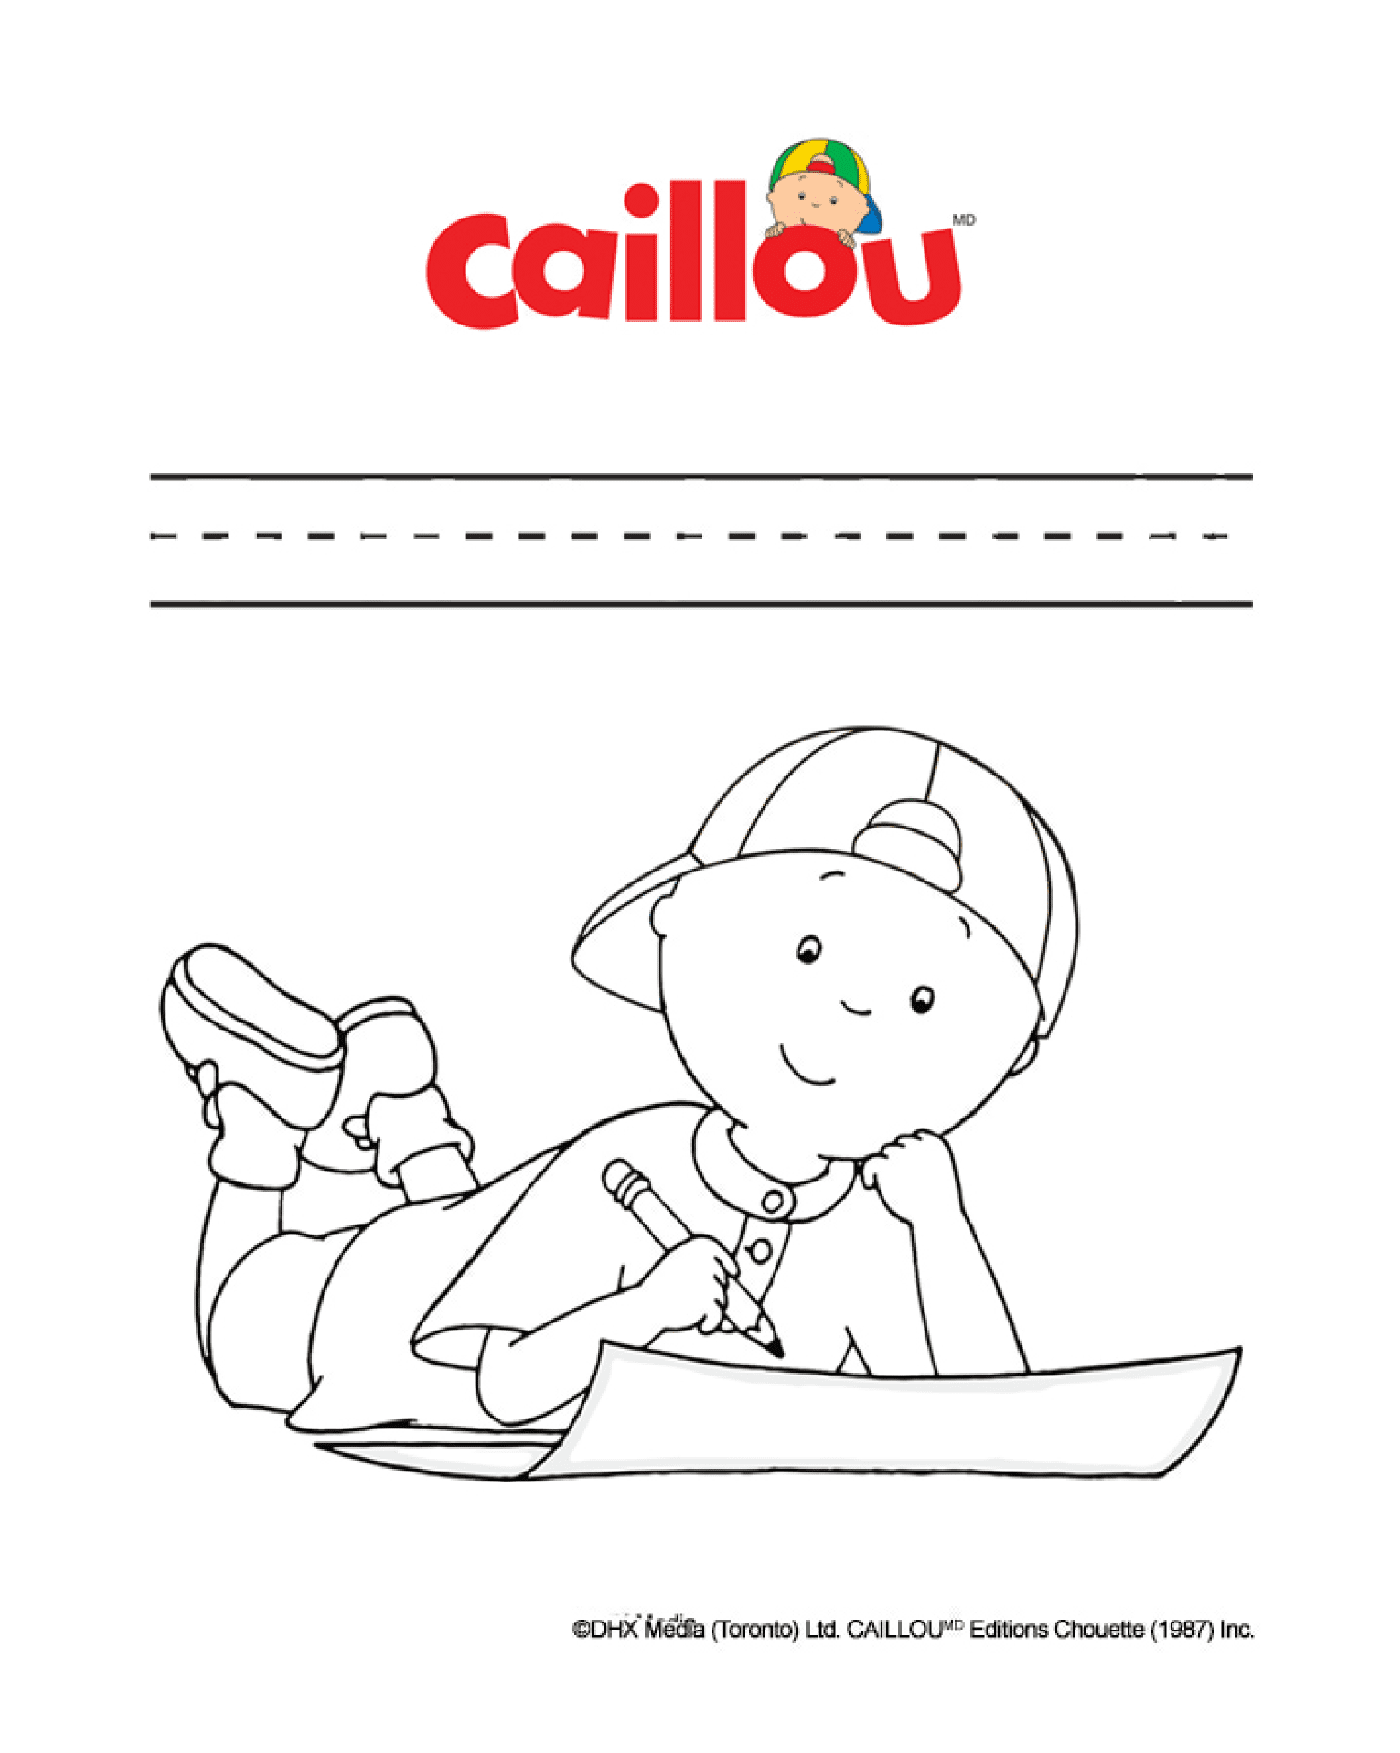  Caillou loves to write and color 